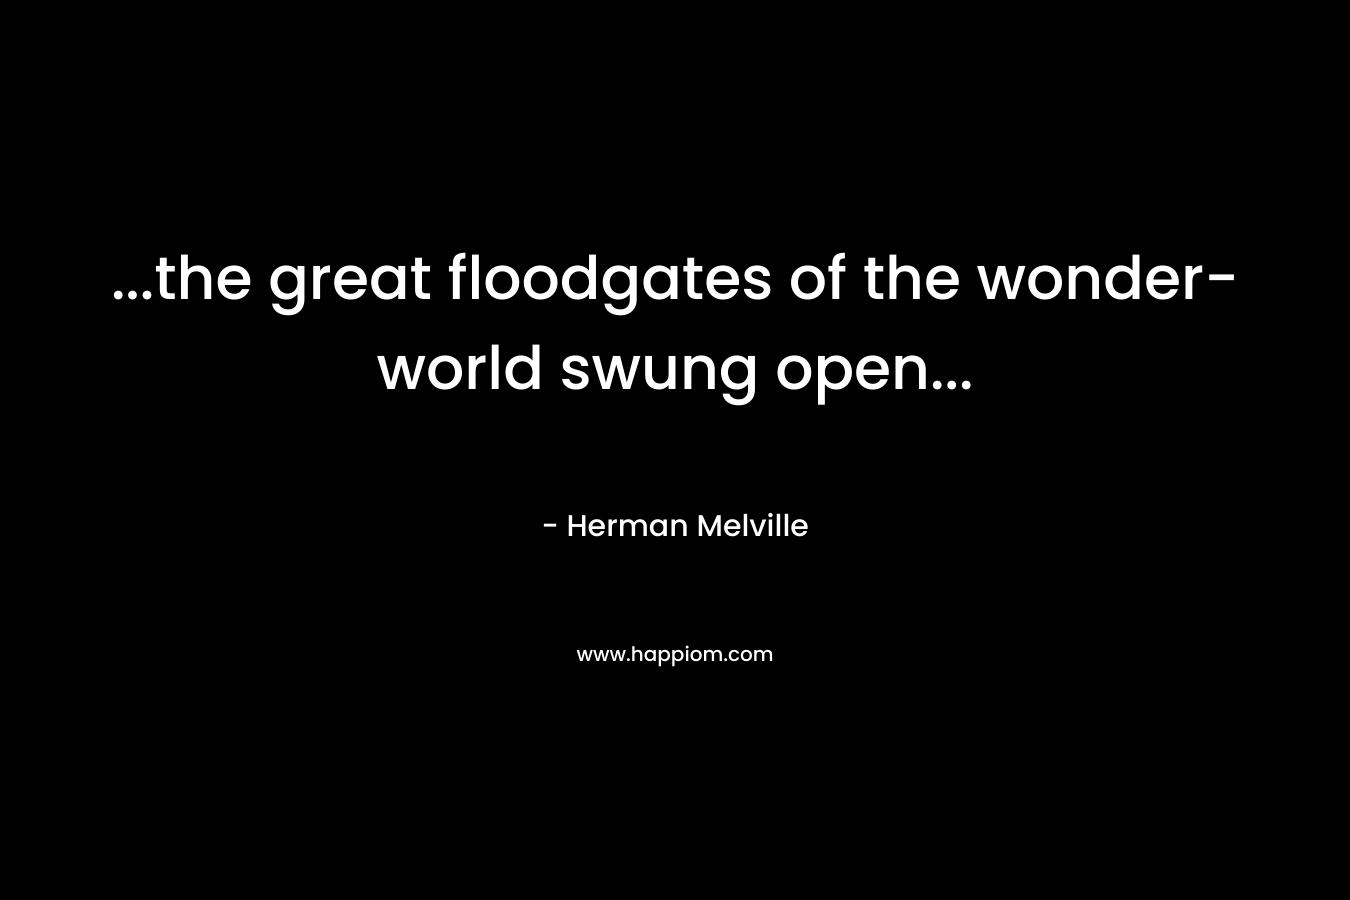 …the great floodgates of the wonder-world swung open… – Herman Melville